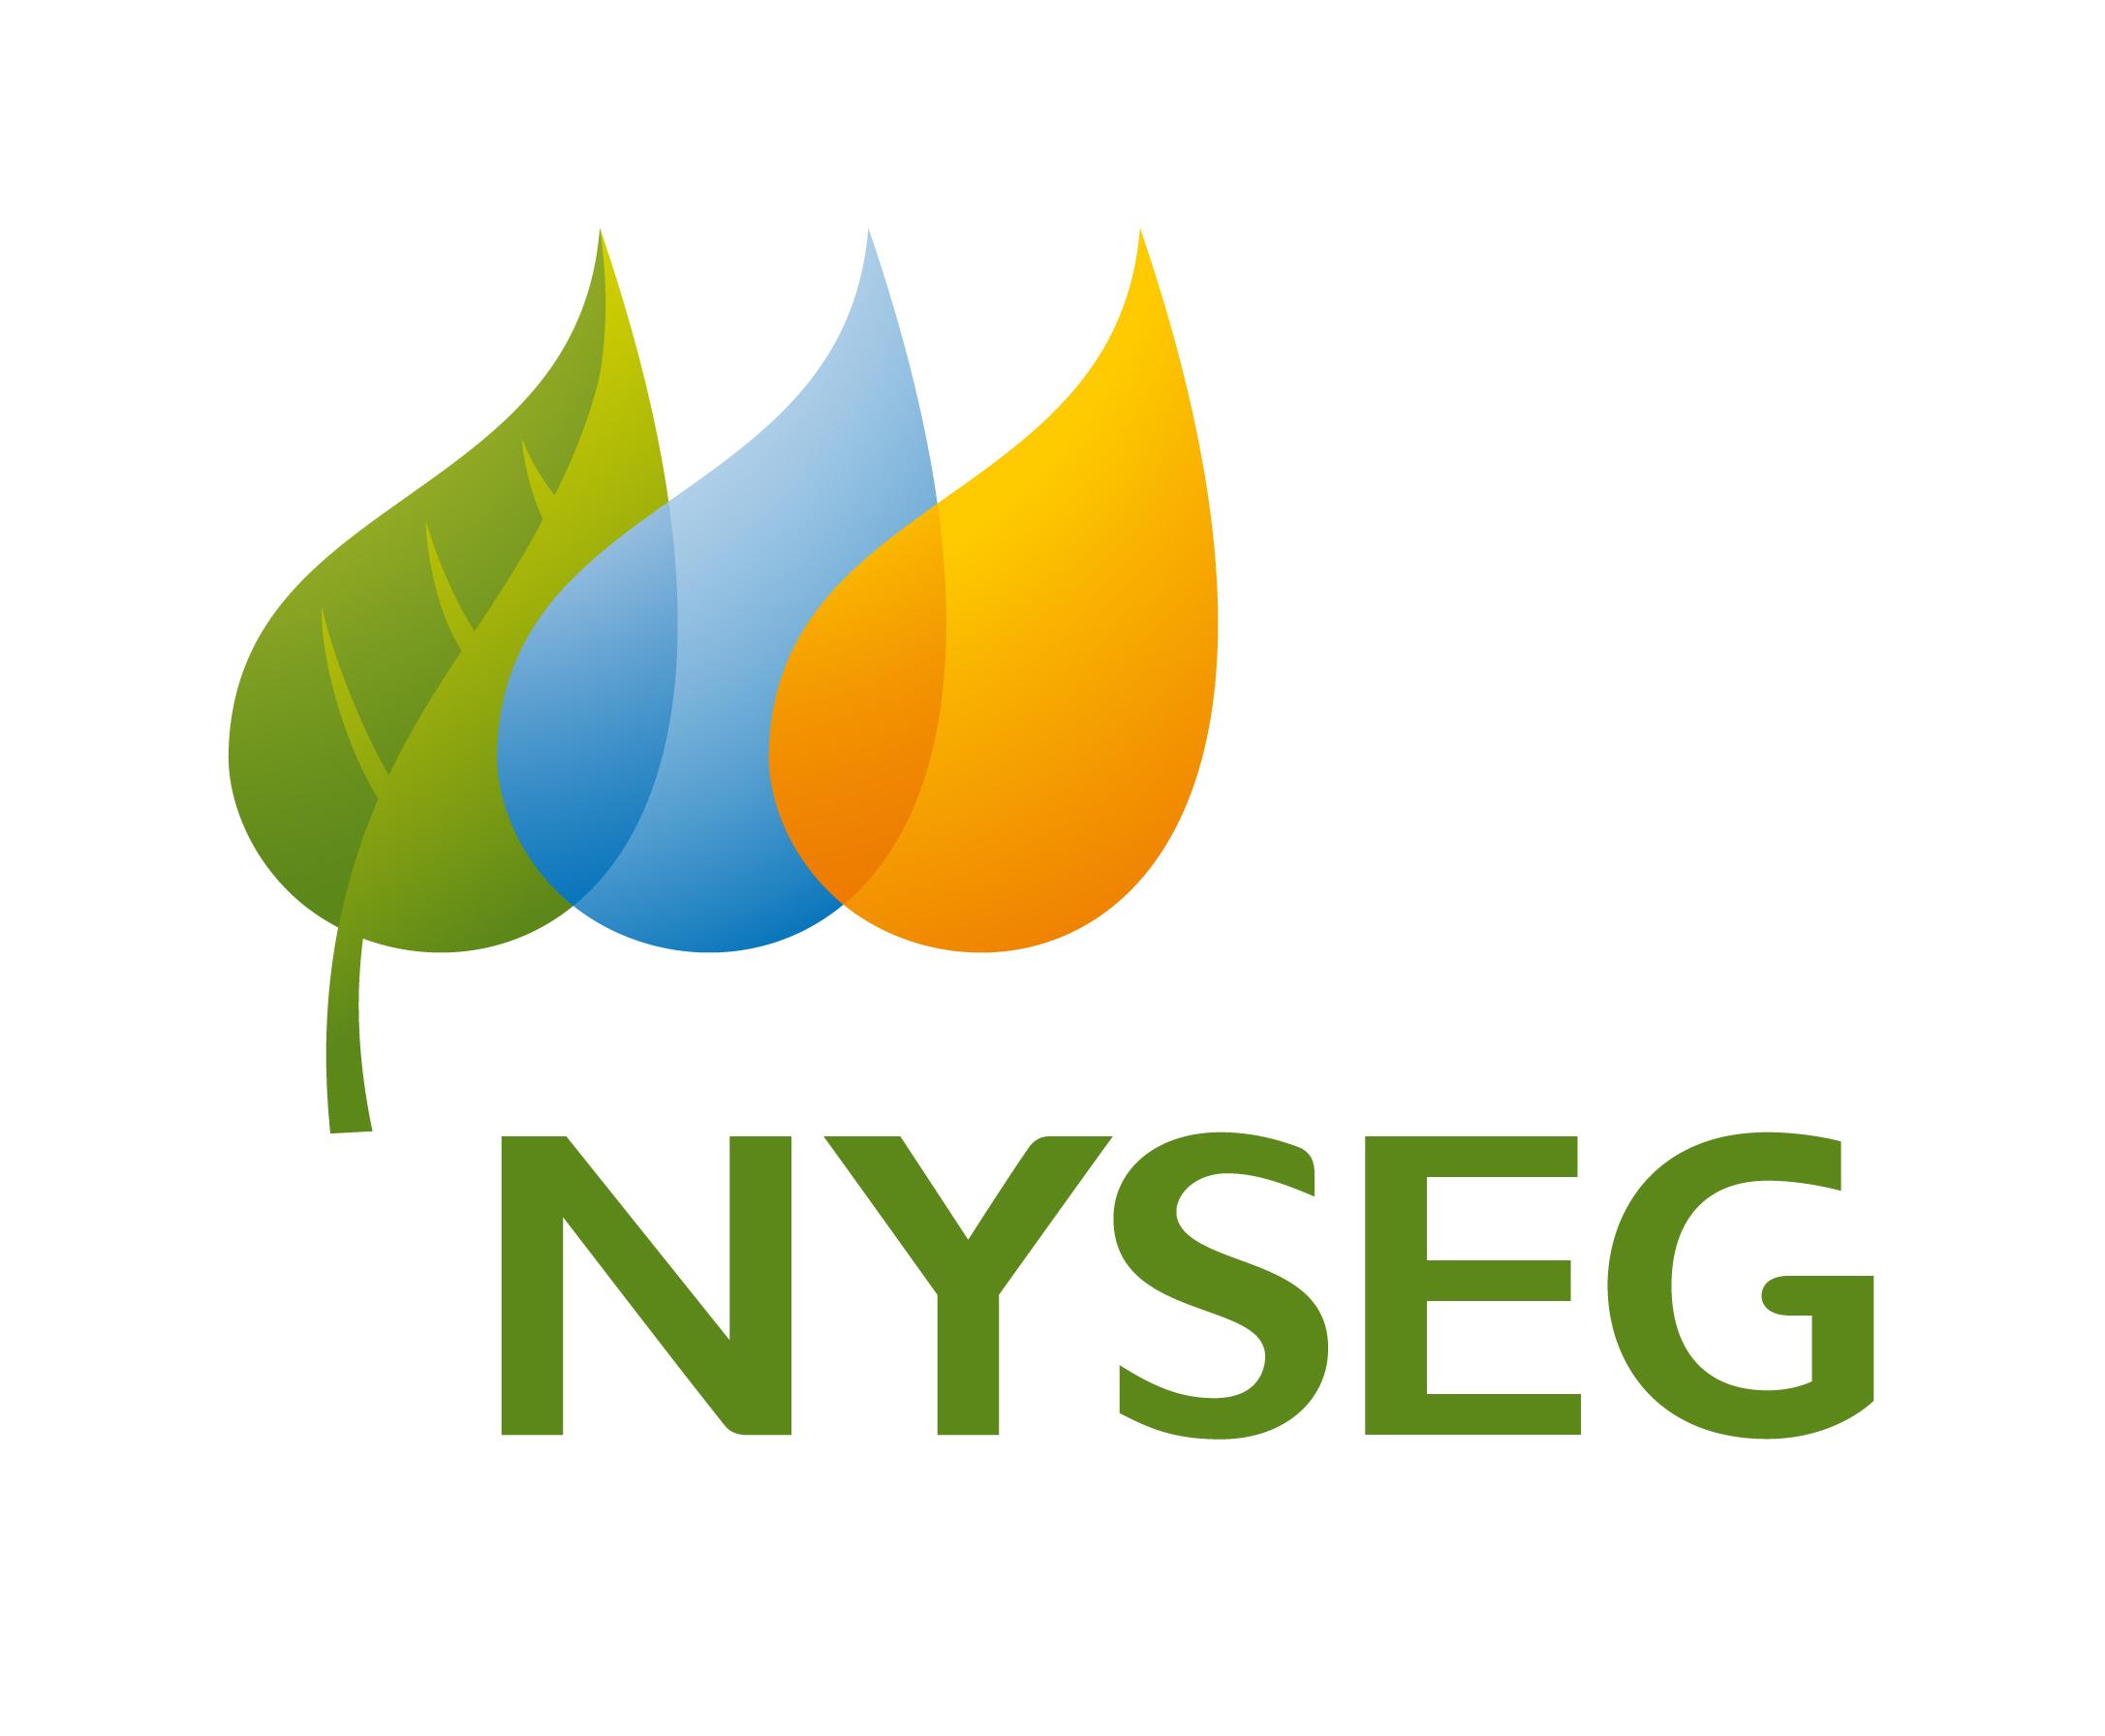 Copper Theft Causes NYSEG Outage WBFO